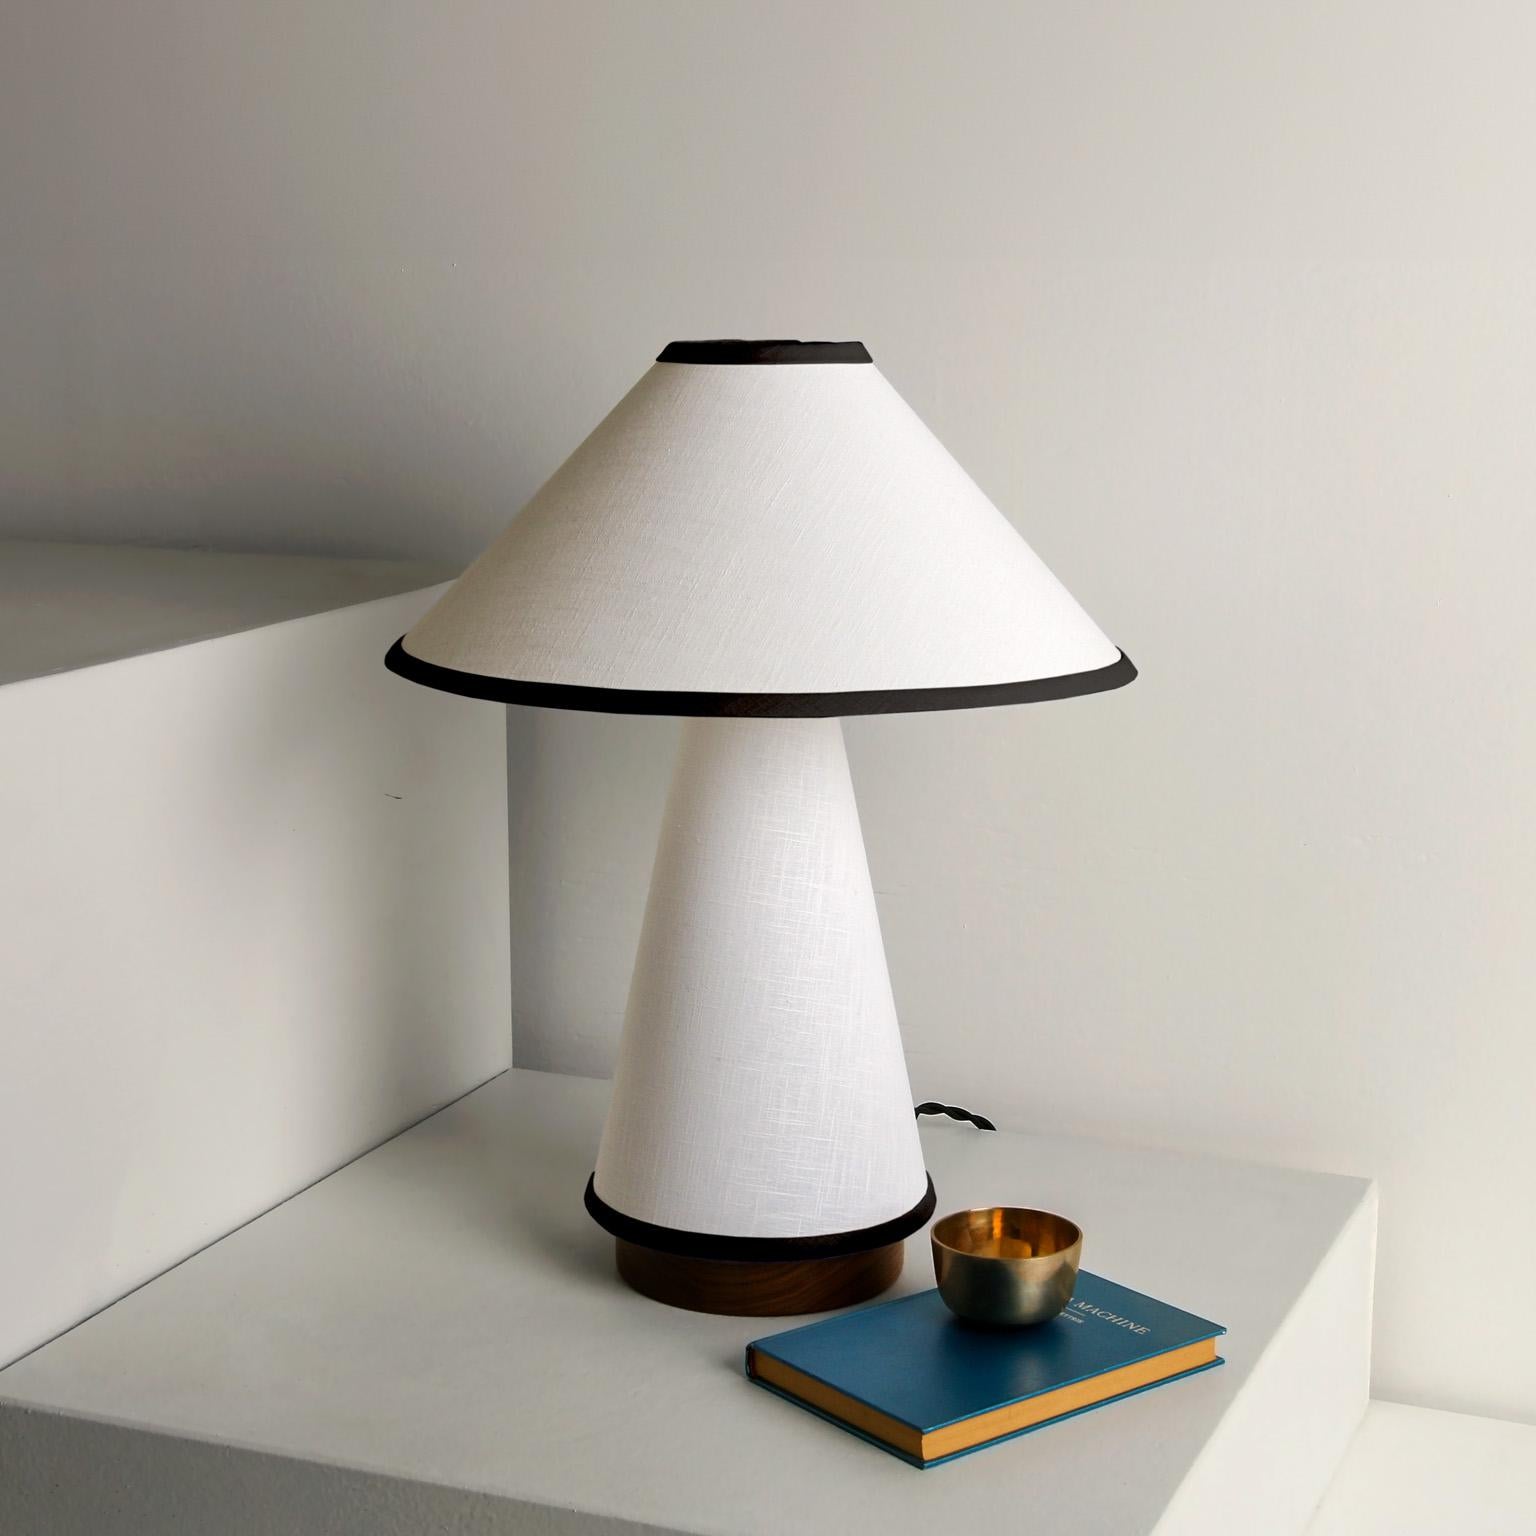 Our contemporary Linden Table Lamp is now available in a shorter 20.5